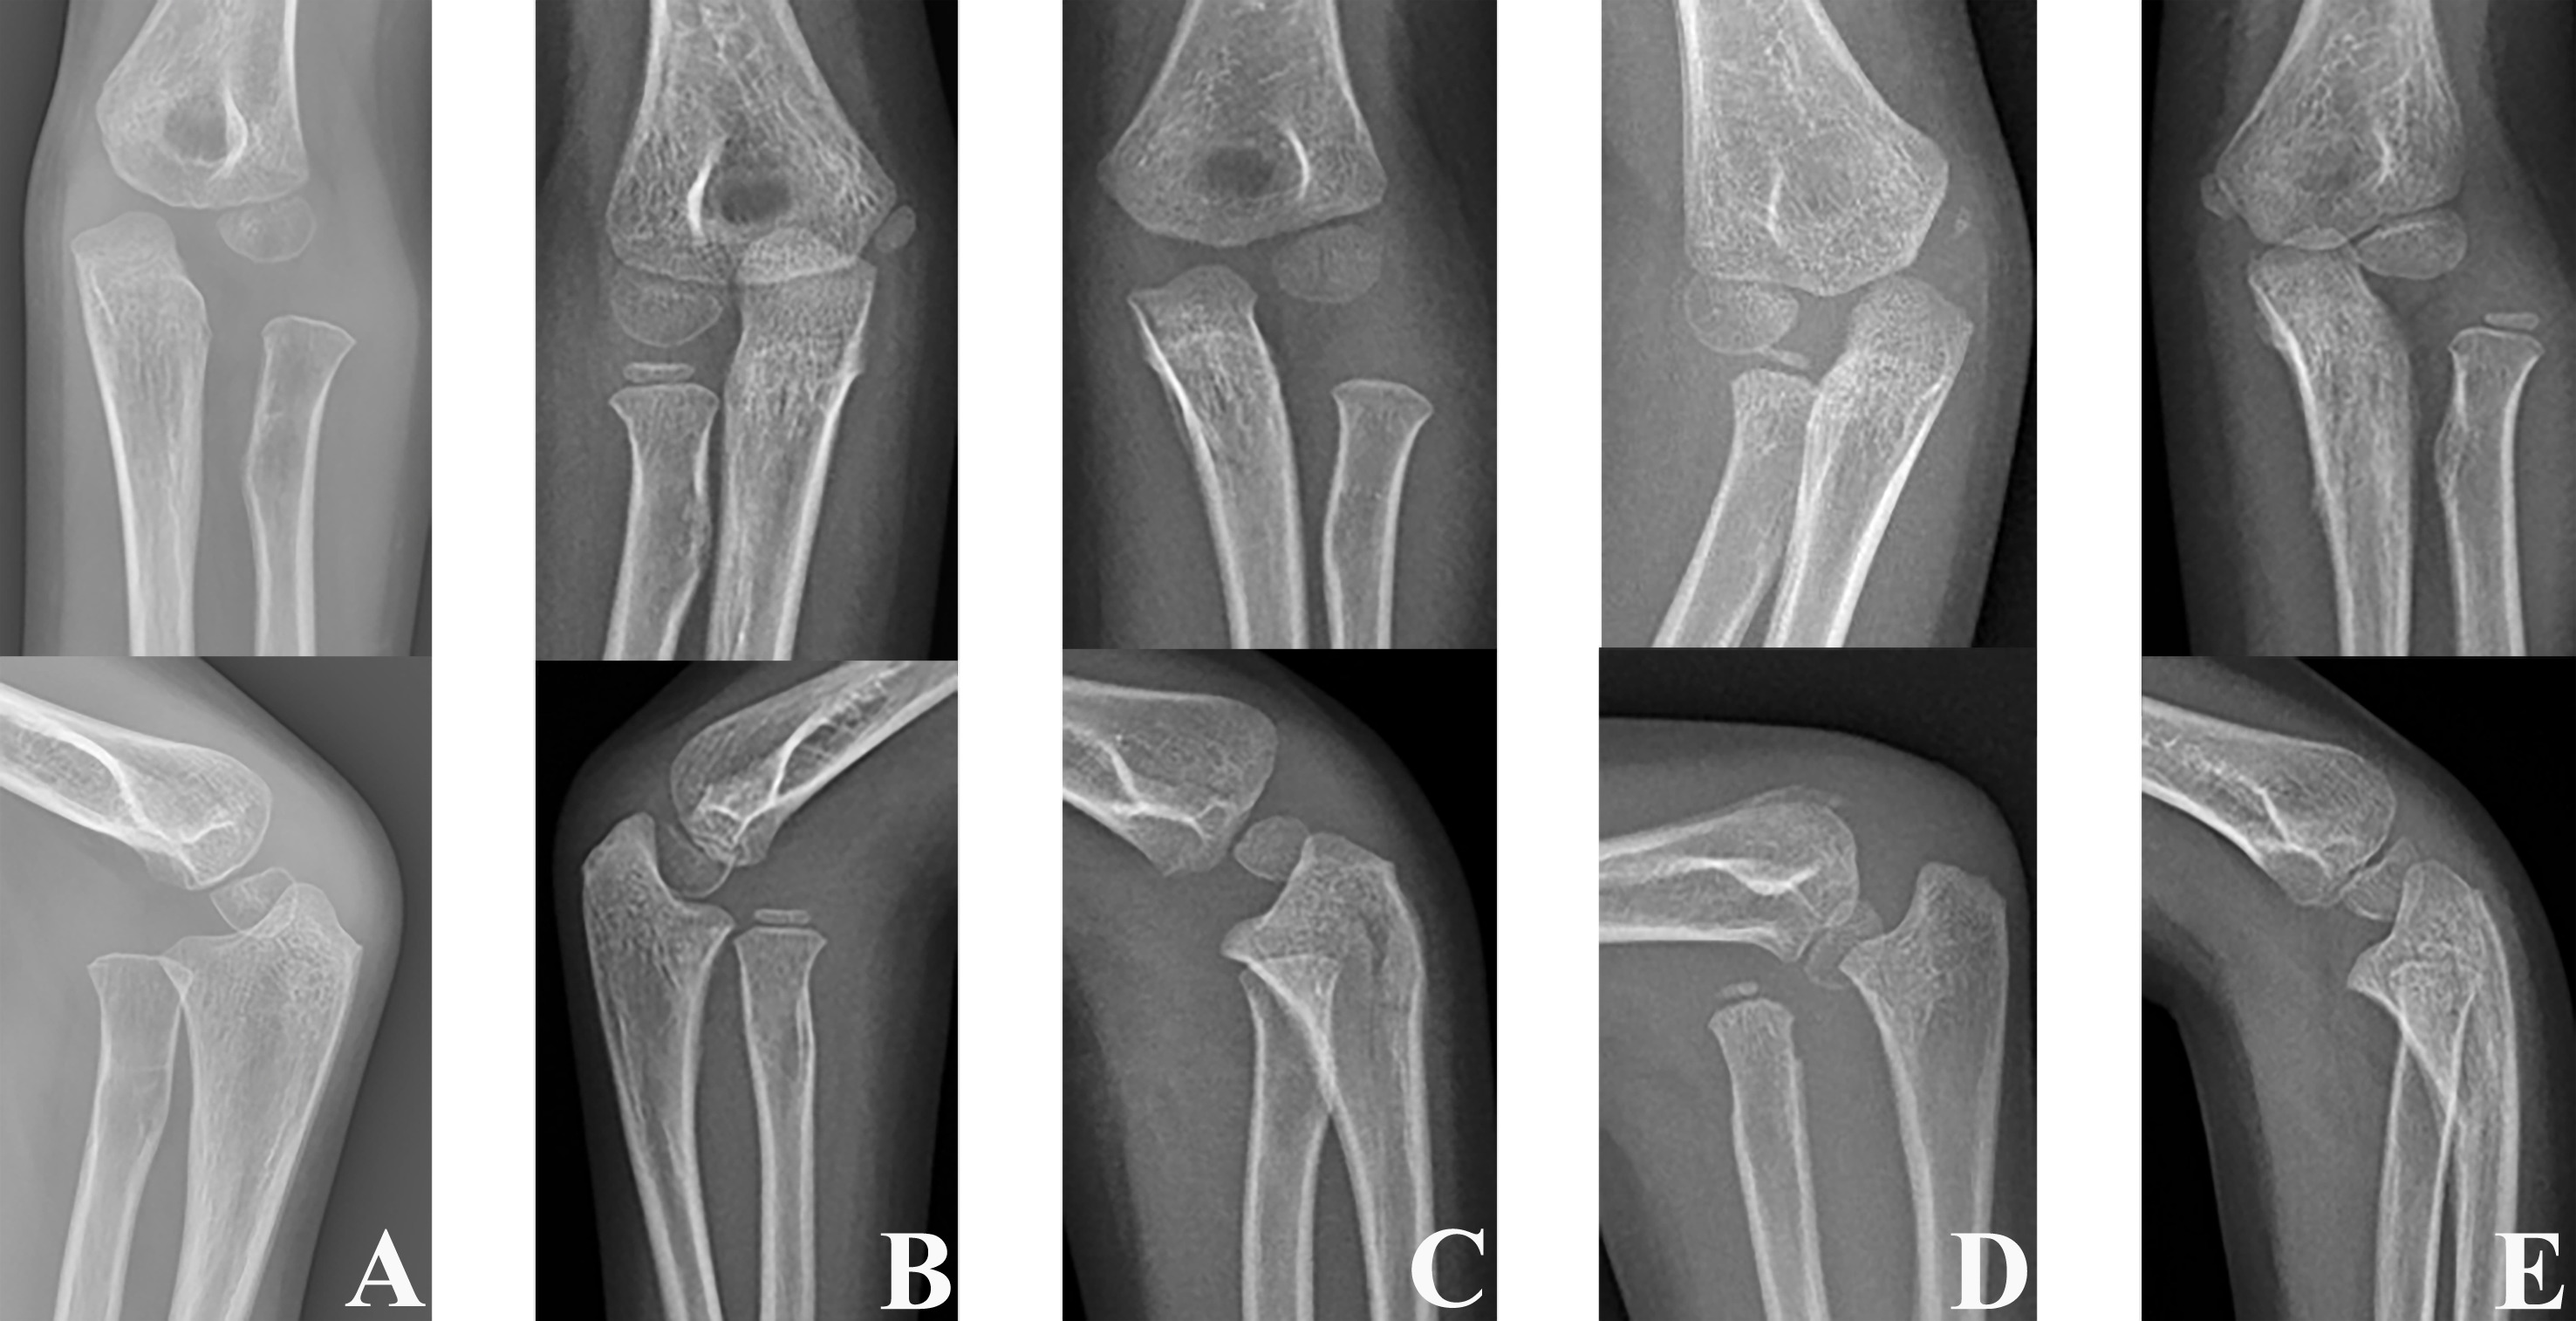 Fig. 1 
            Direction of radial head dislocation according to anteroposterior and lateral radiographs: a) anterolateral, b) anterior, c) lateral, d) anteromedial, and e) posterolateral.
          